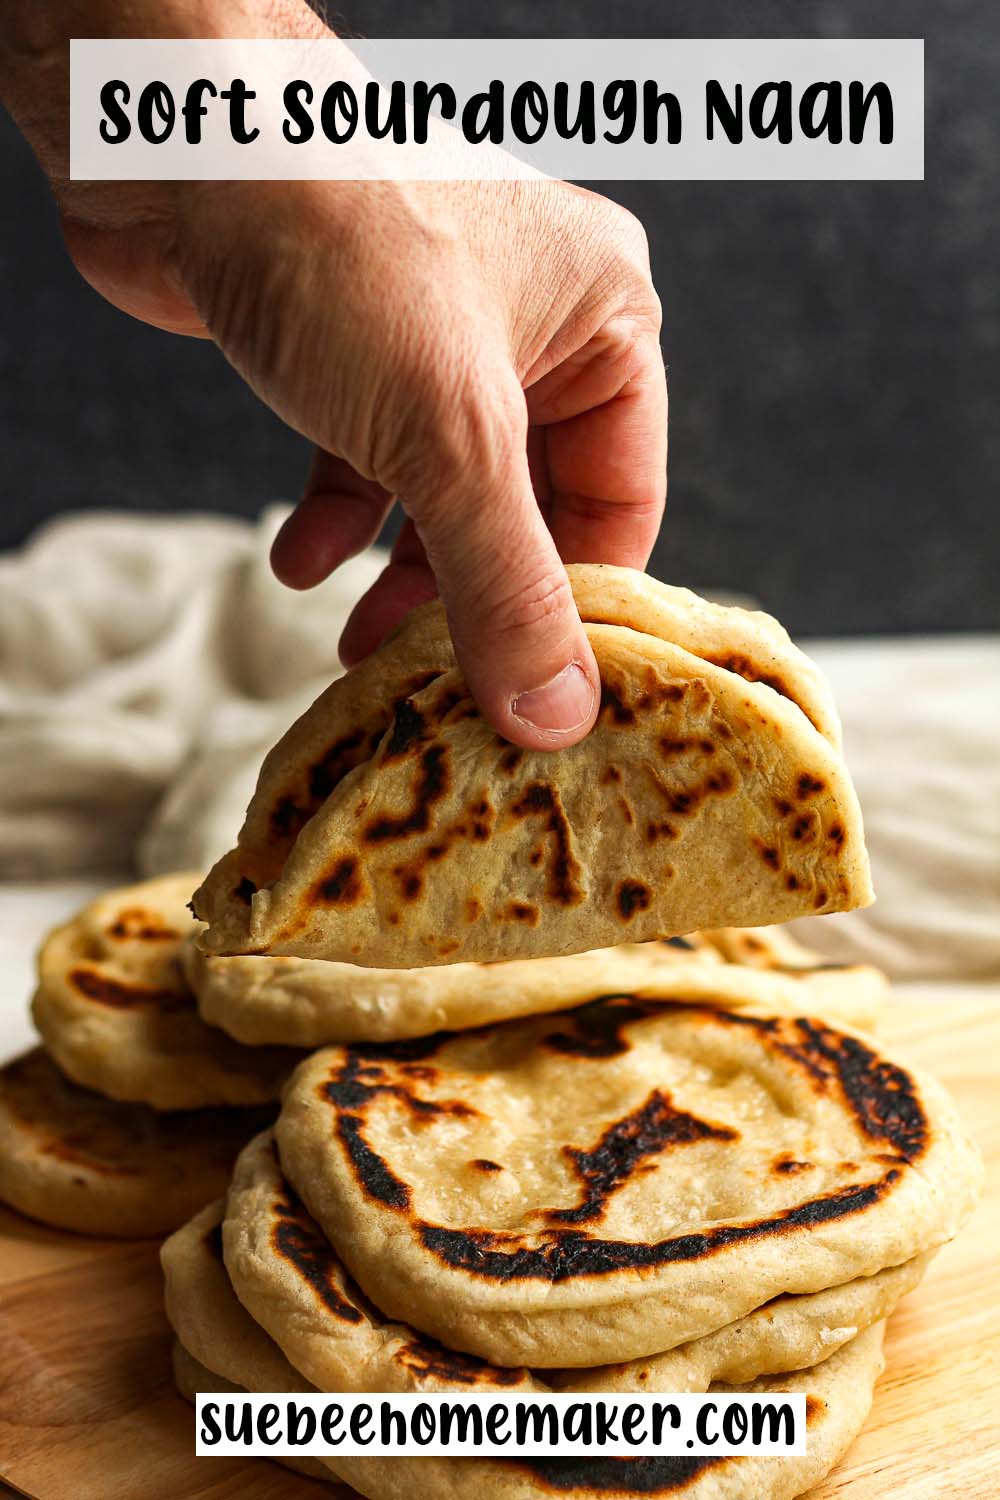 A hand holding a rolled up soft sourdough naan.